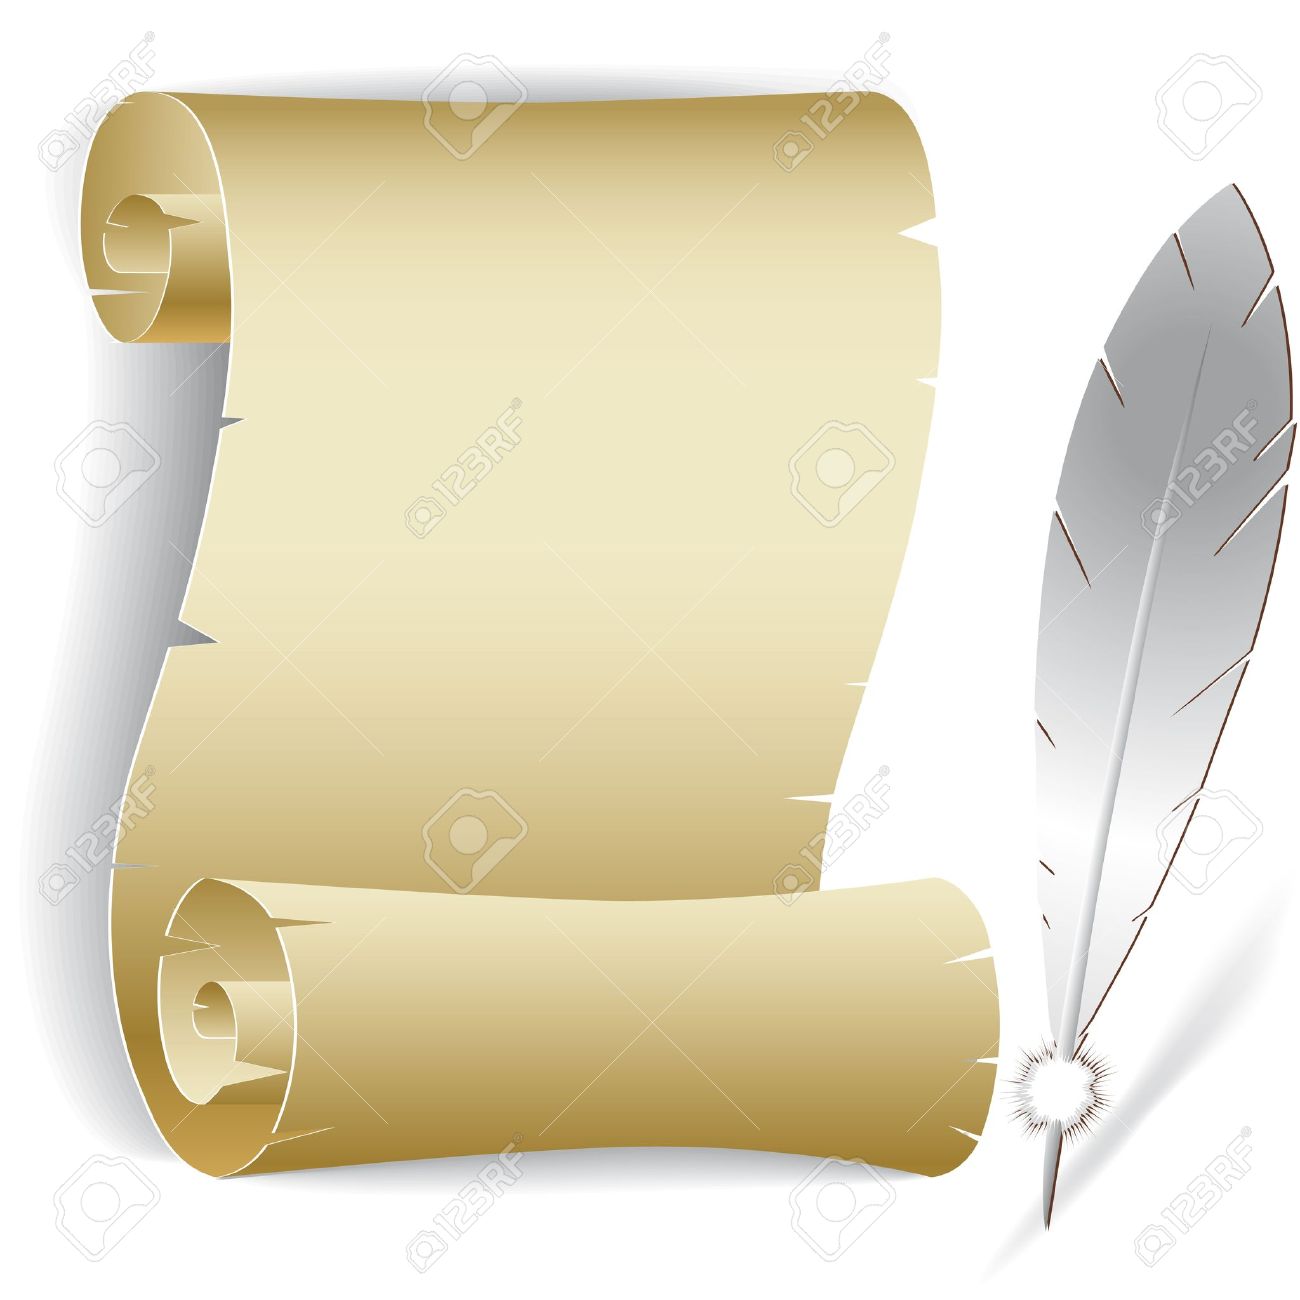 Old Paper Roll With Feather Vector Illustration Of Contact List